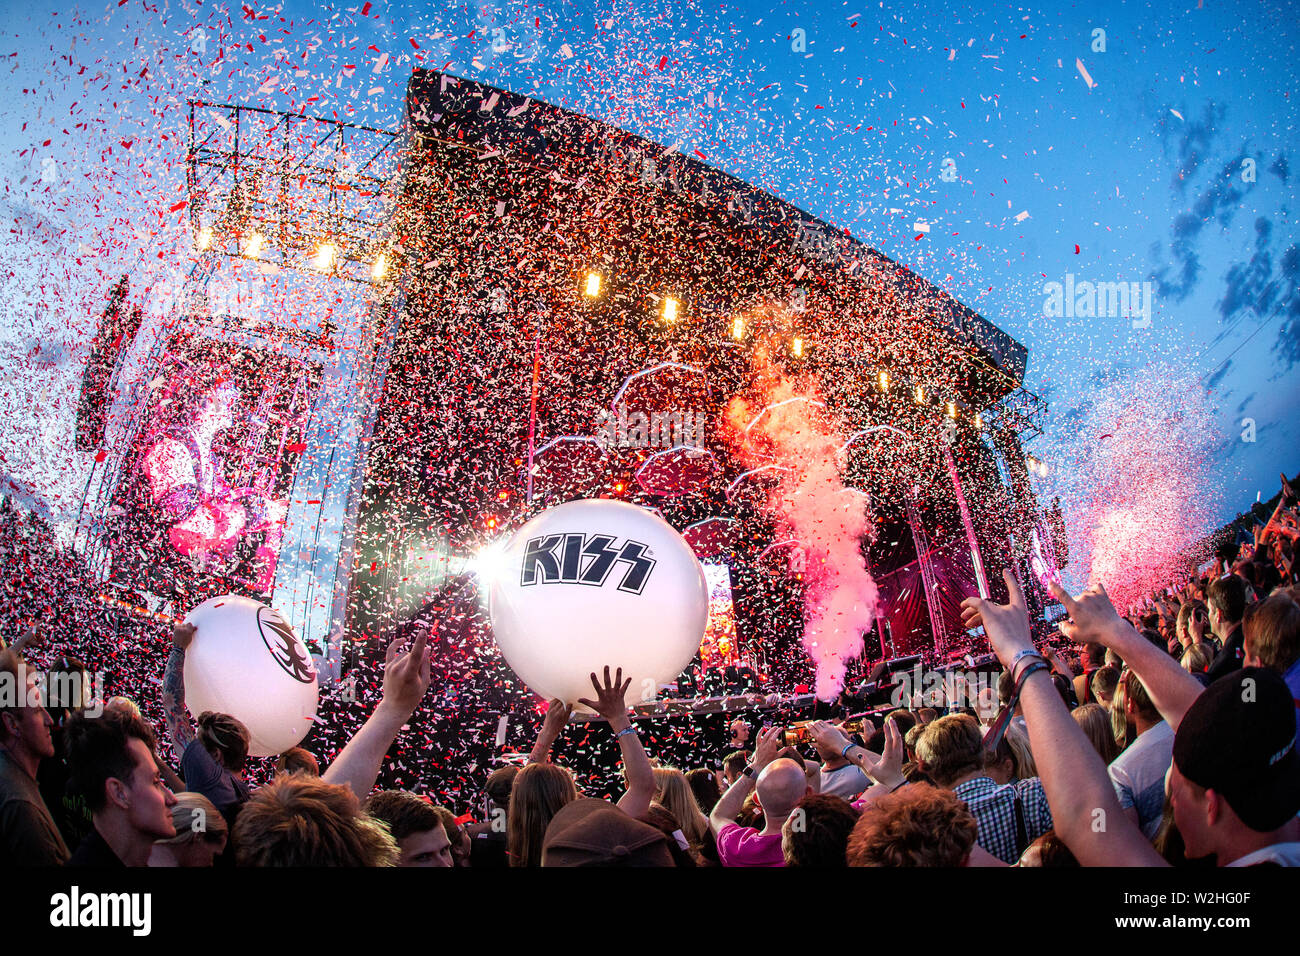 Oslo, Norway - June 27, 2019. The American rock band Kiss performs a live  concert during the Norwegian music festival Tons of Rock 2019 in Oslo.  (Photo credit: Gonzales Photo - Terje Dokken Stock Photo - Alamy